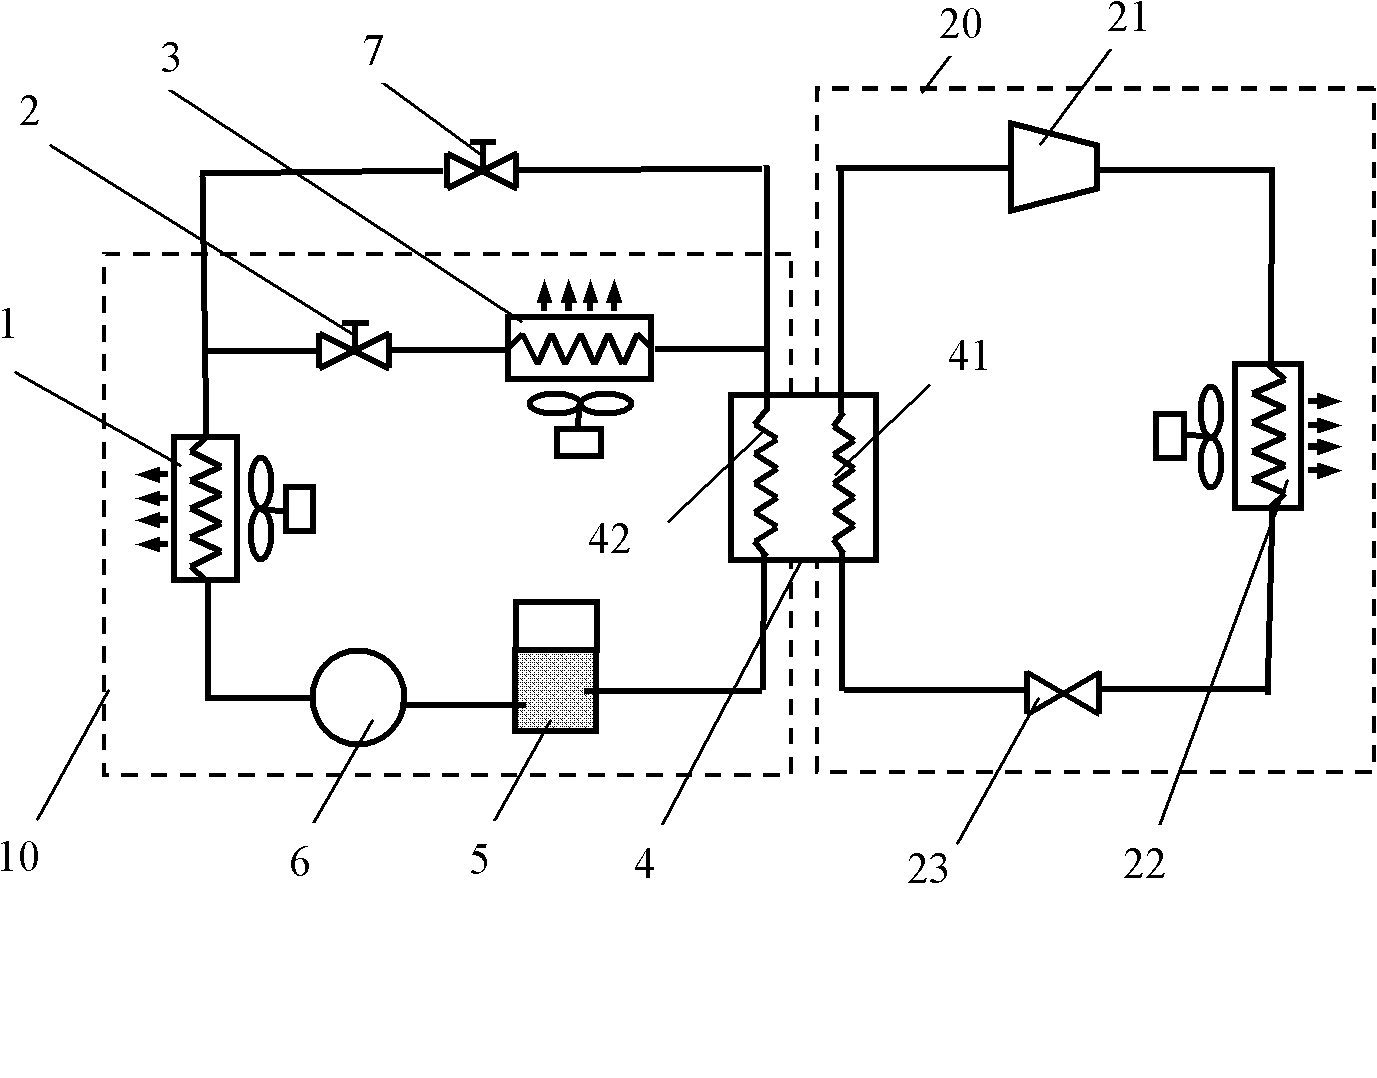 Heat pipe composite air conditioning unit for machine room and control method of heat pipe composite air conditioning unit